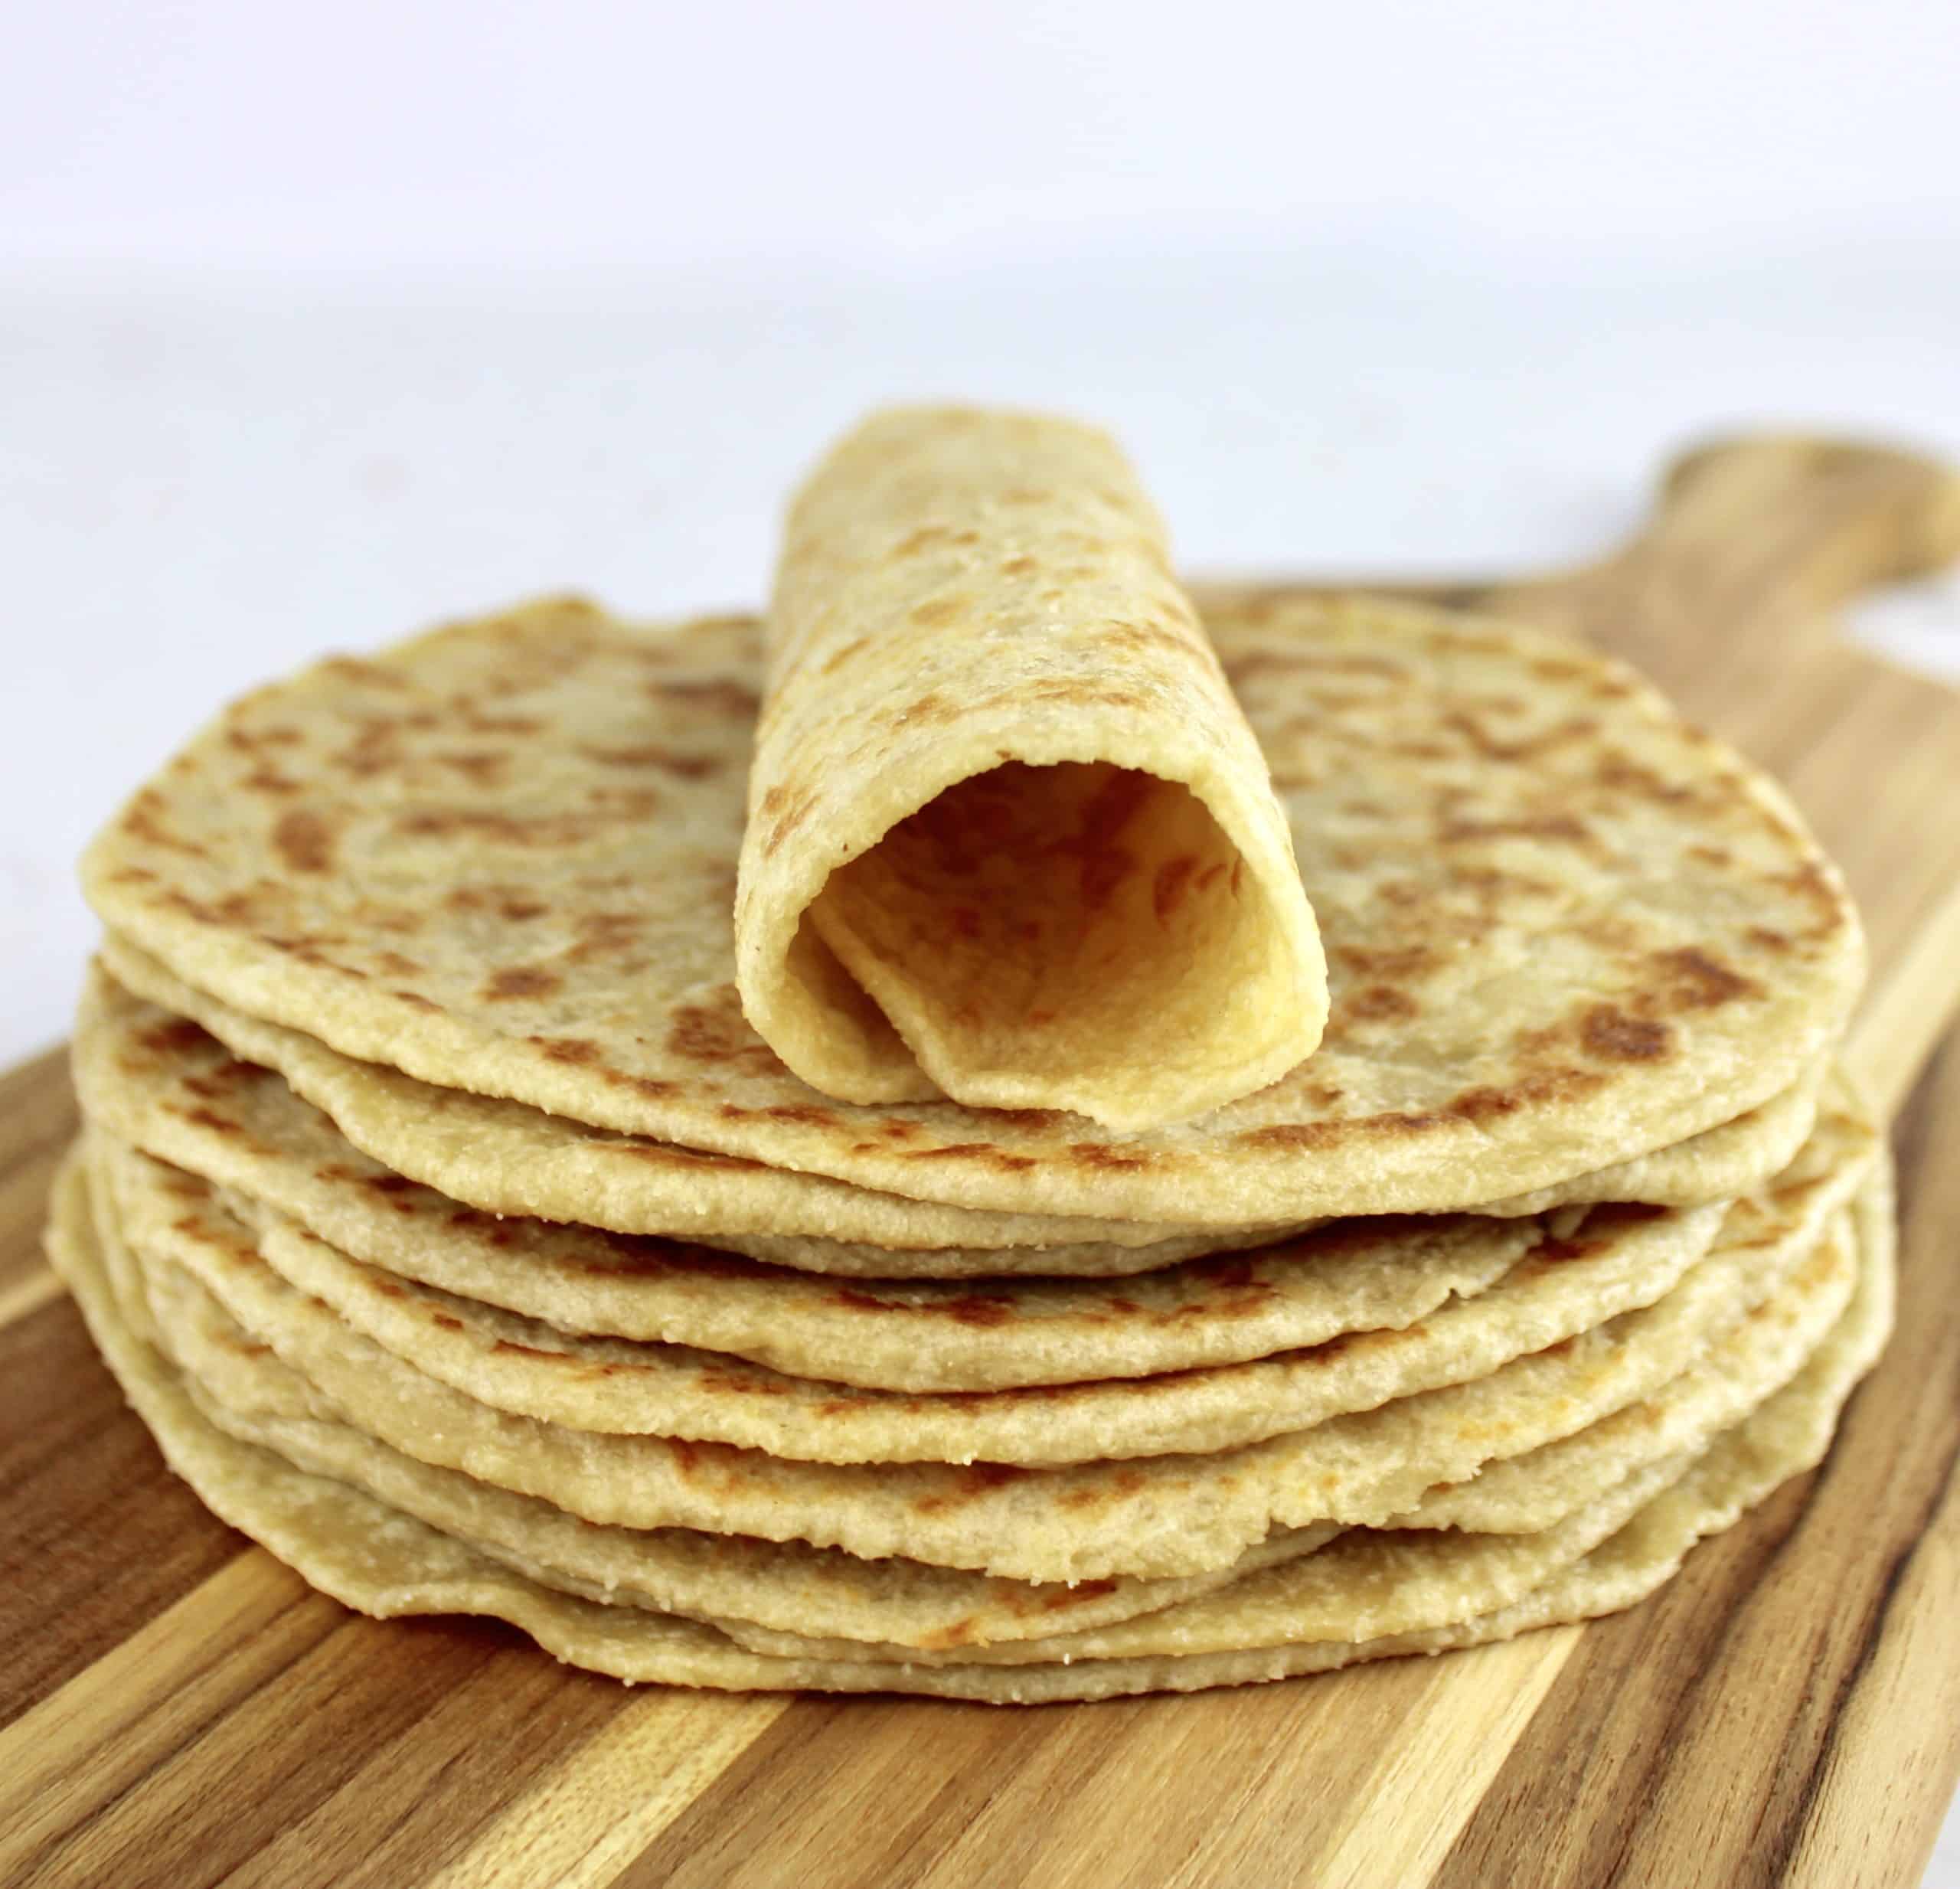 stack of keto tortillas with one rolled up on top